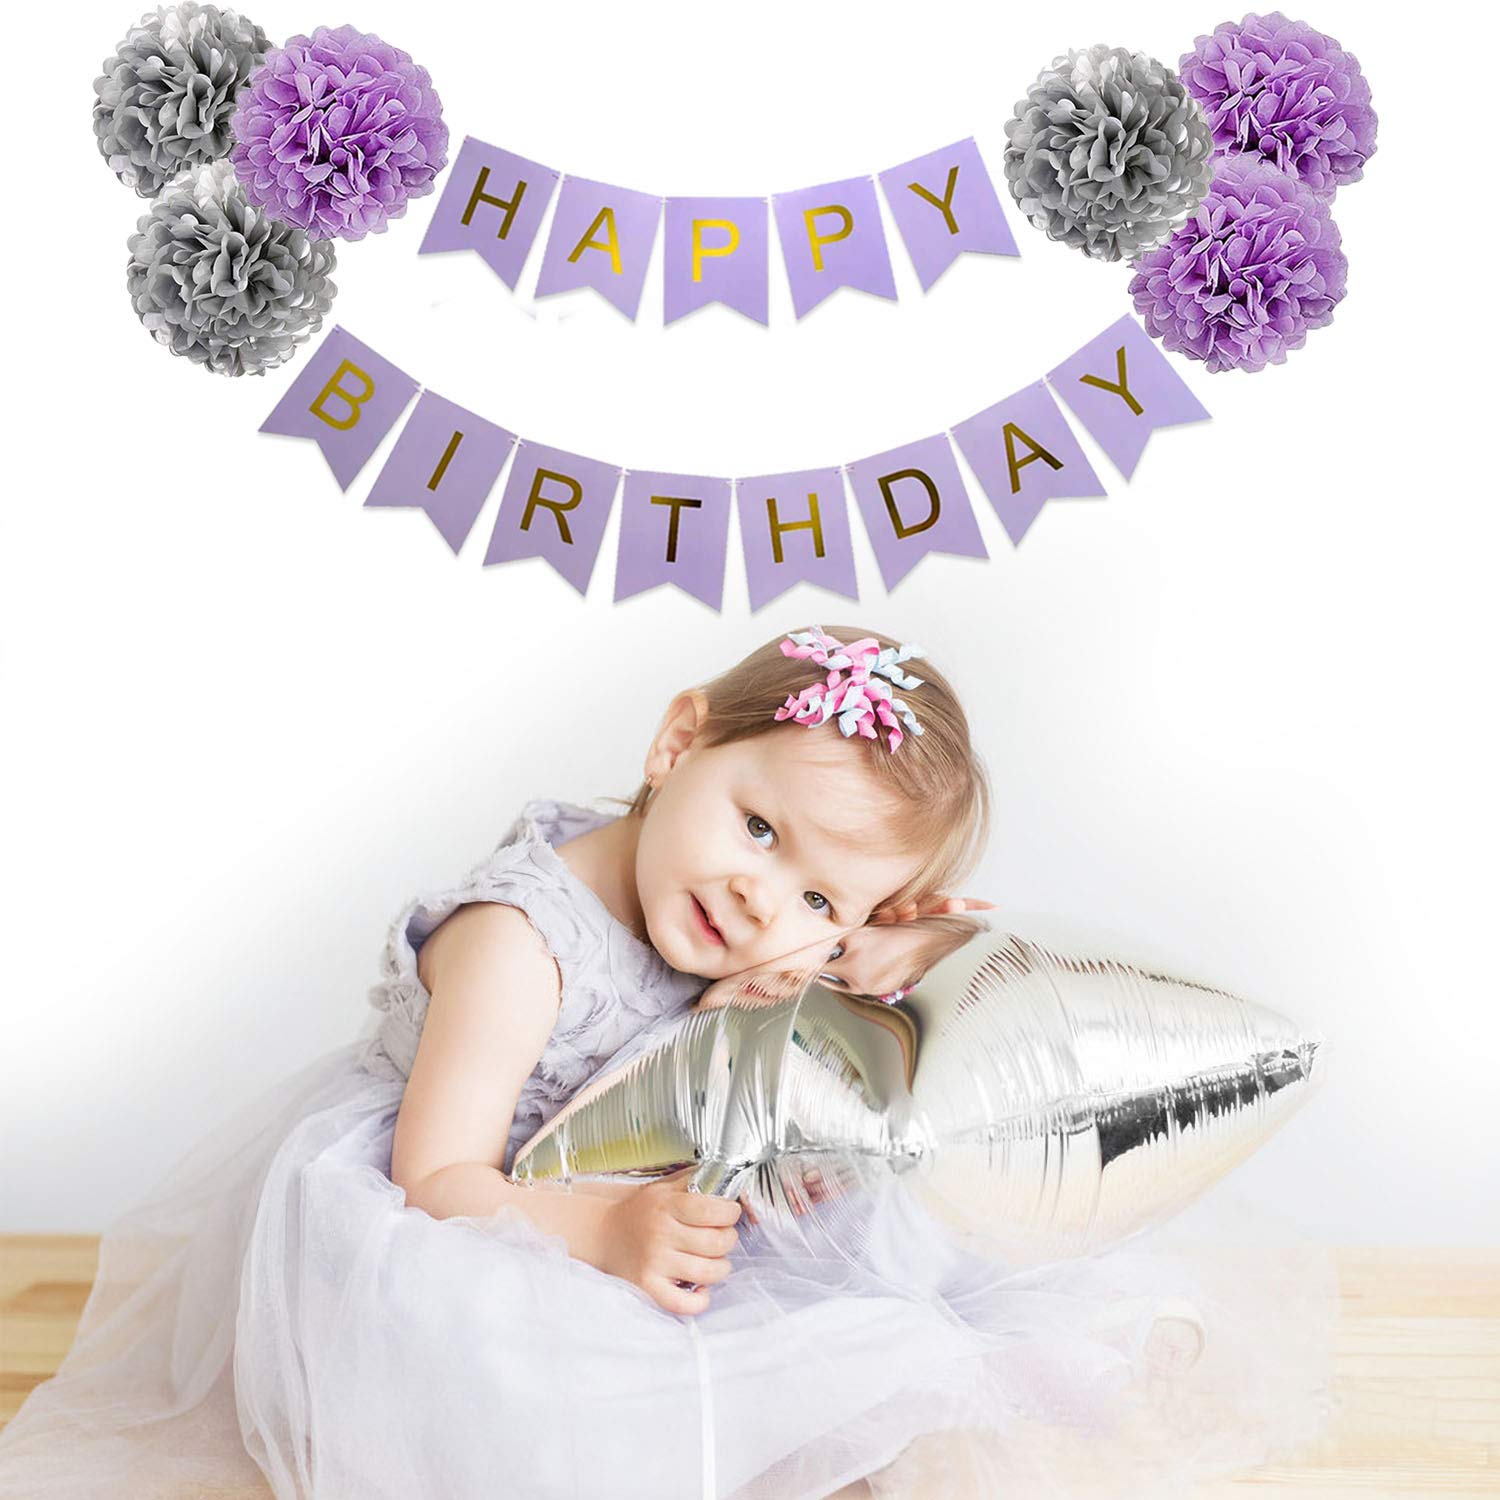 Rabbmall Birthday Decorations for Girls Purple and Silver Lavender Party Decor Kit for Her Women Including Happy Birthday Banner Pompom Flower Foil Balloons Confetti Latex Balloon Ribbons